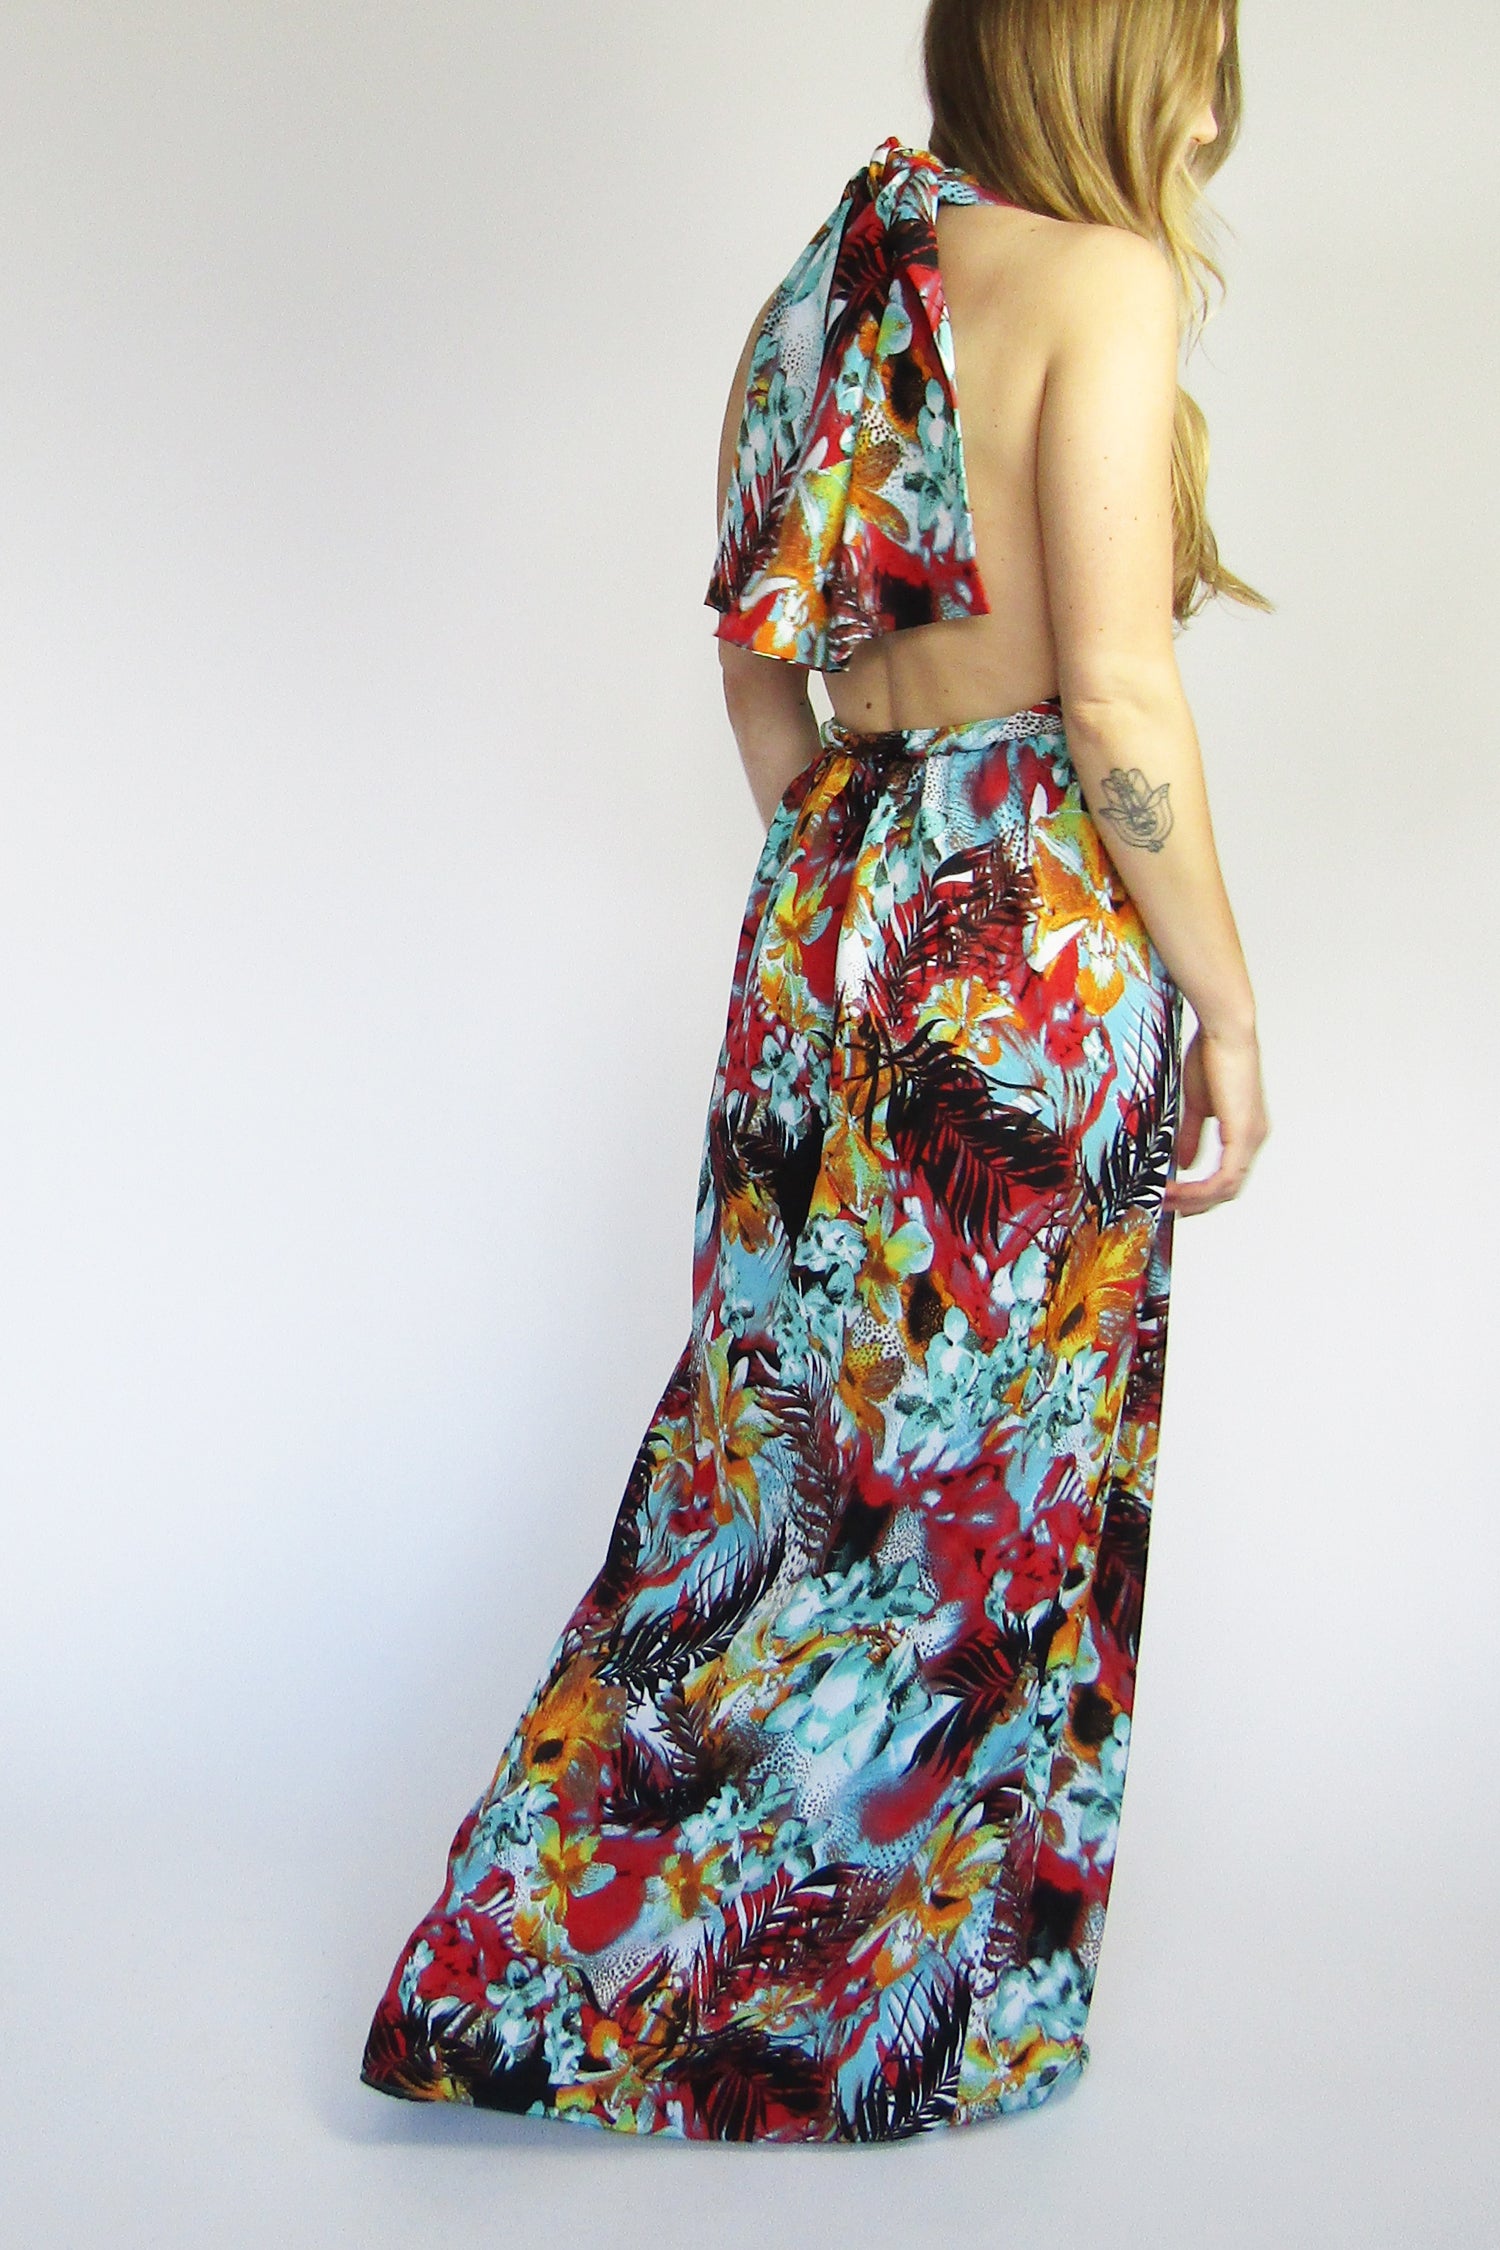 Turquoise Tropical Print Backless Maxi Dress